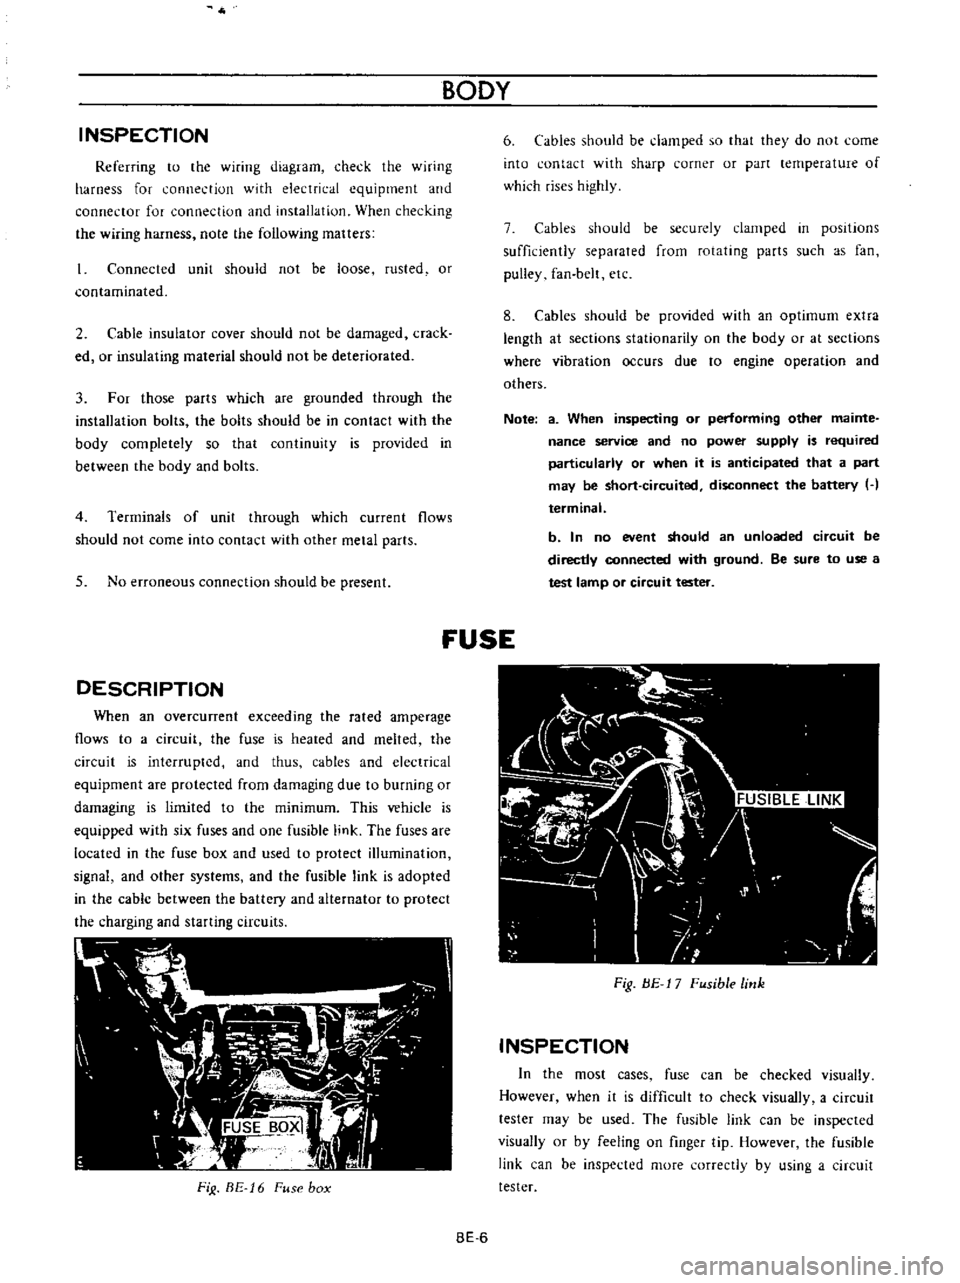 DATSUN B110 1973  Service Repair Manual 
INSPECTION

Referring 
to 
the

wiring 
diagram 
check 
the

wiring

harness

for 
connection 
with 
electrical

equipment 
and

connector 
for 
conned 
ion 
and 
installation 
When

checking

the

w